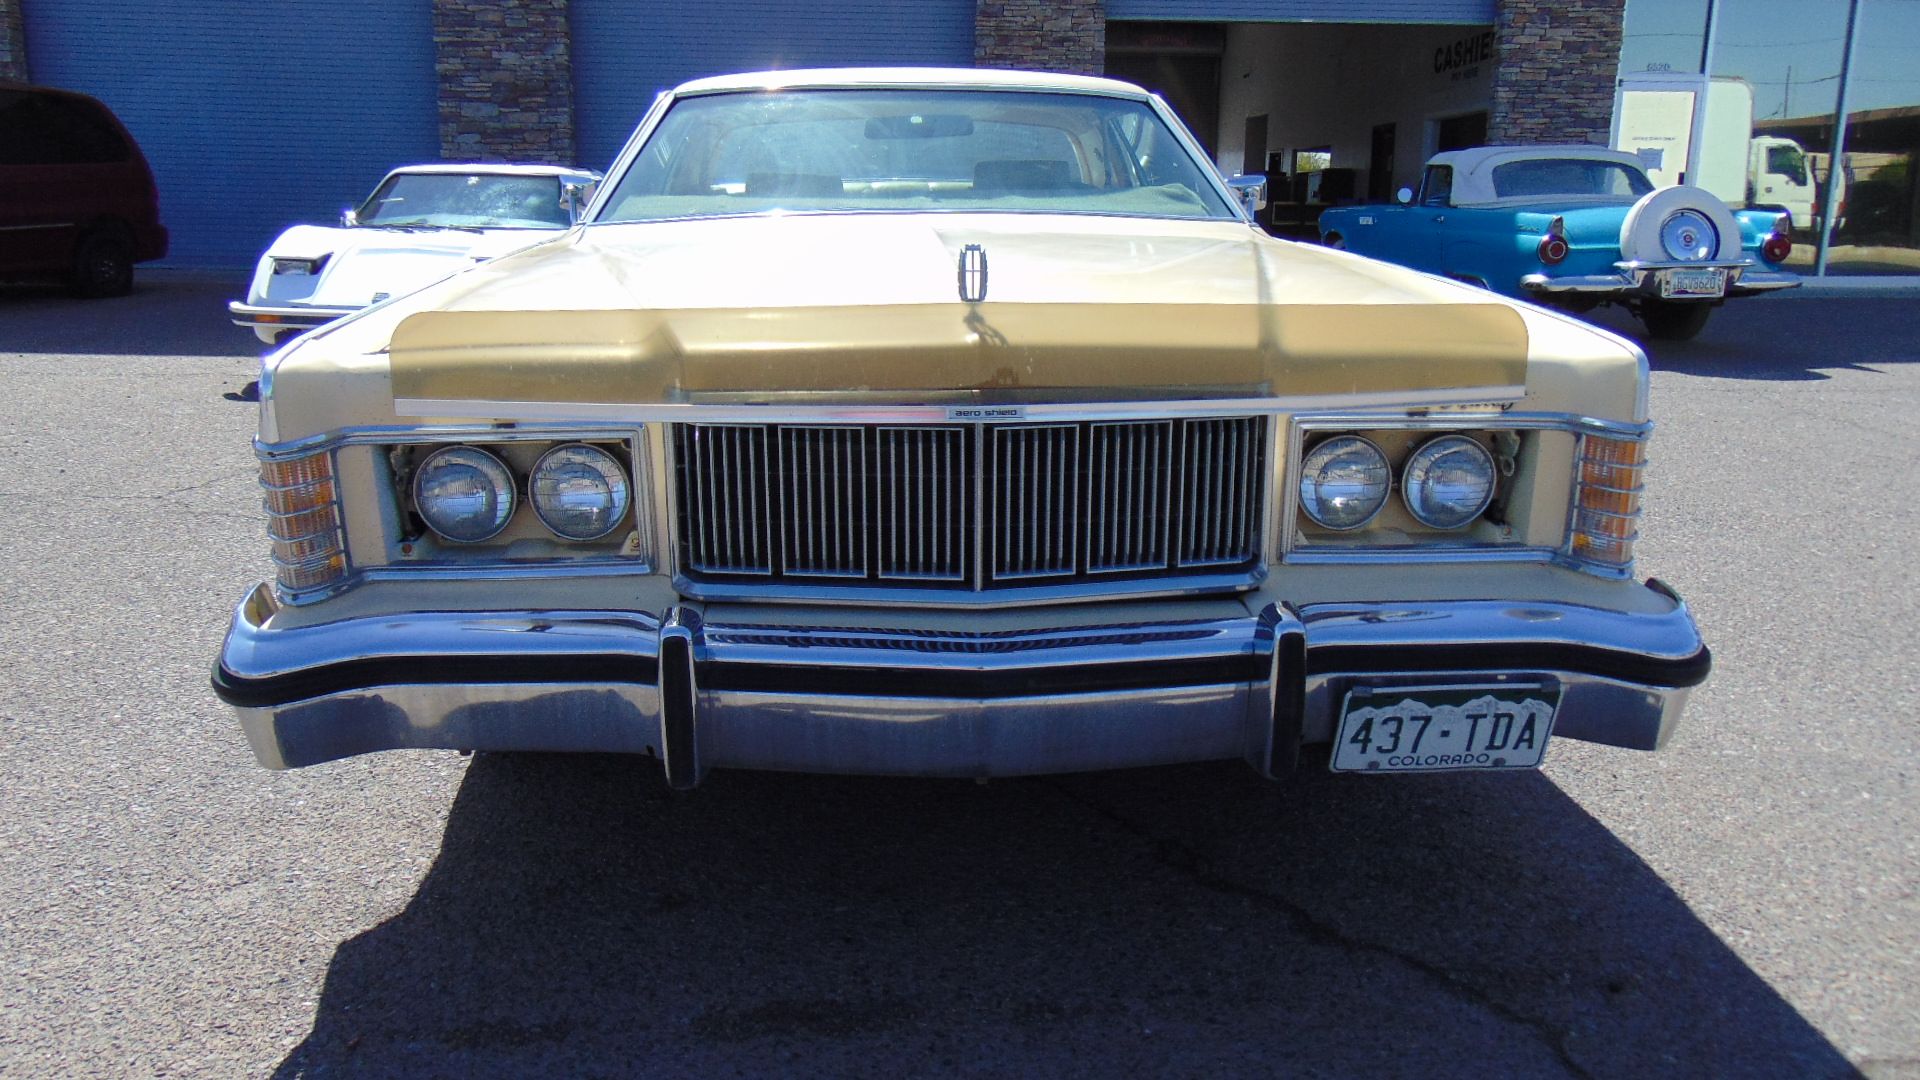 1978 MERCURY GRAND MARQUIS, ODOMETER READING 12,838, VIN. 8Z65S644505, 351M GAS, AUTO TRANS, FWD, CR - Image 8 of 13